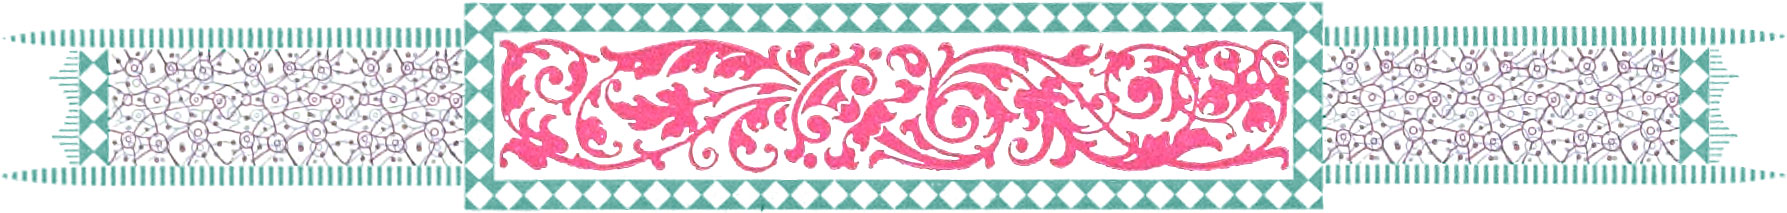 Ornate border comprising pink and teal colors